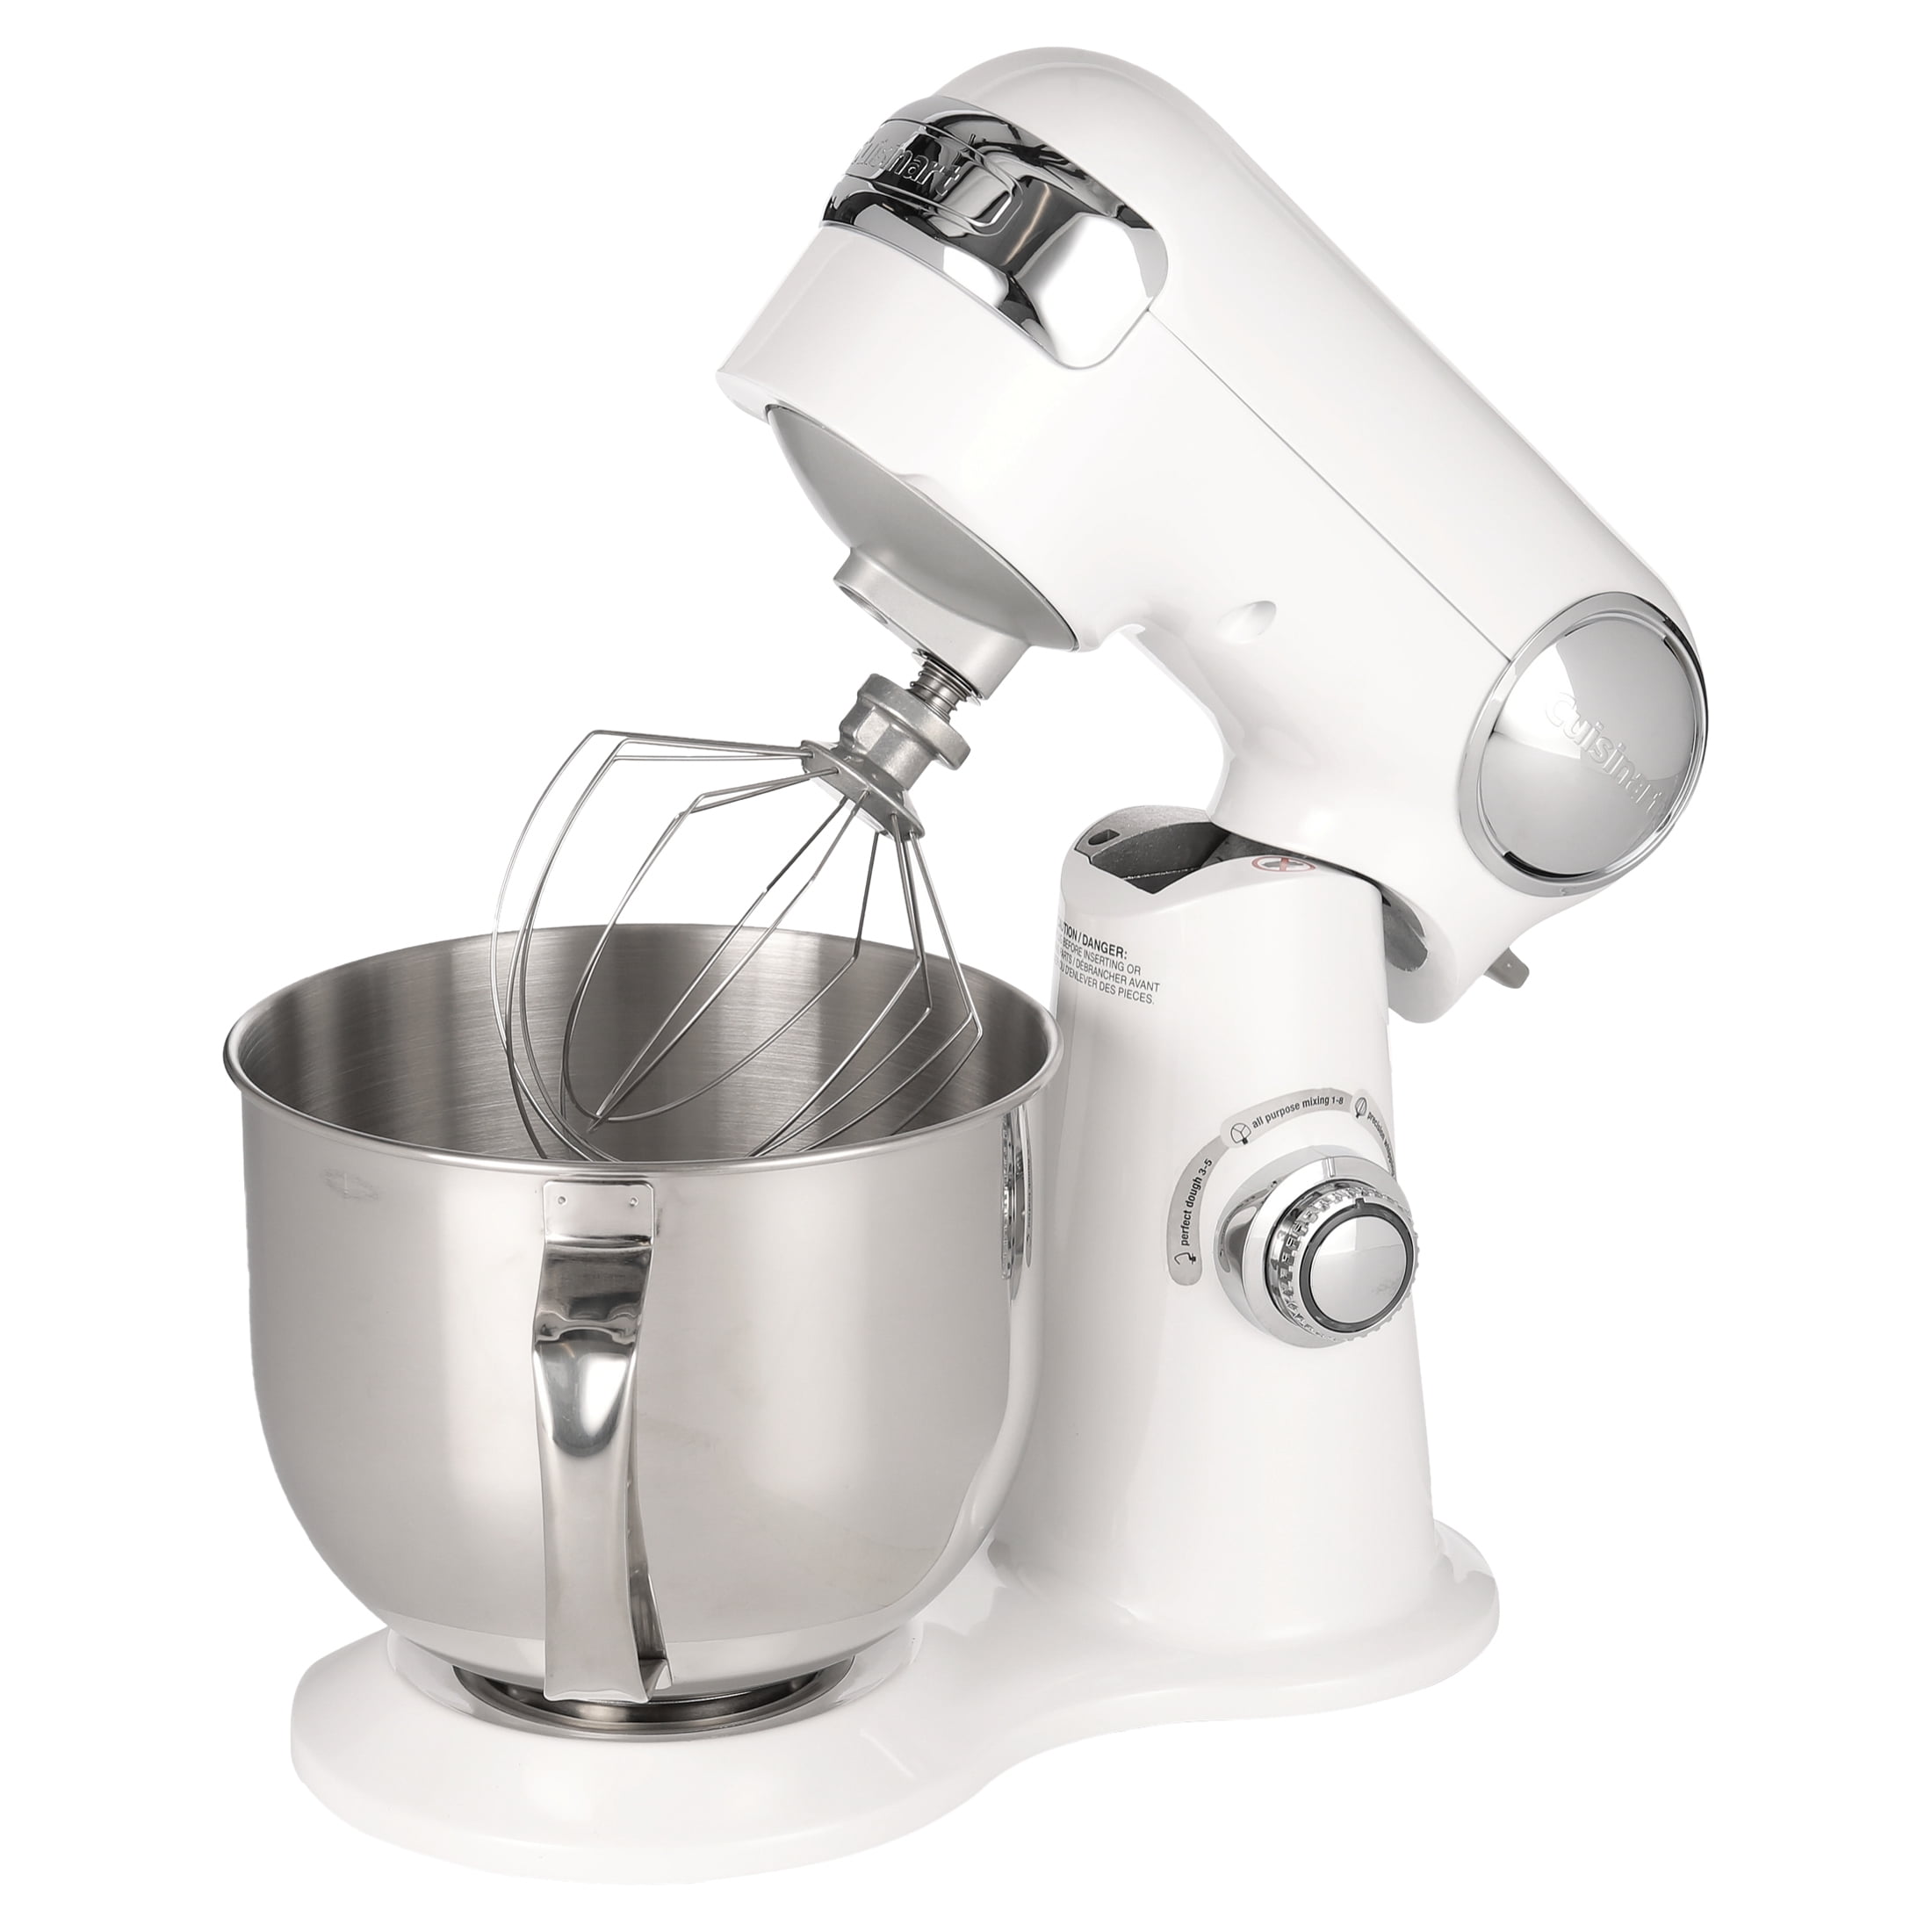 Cuisinart SM-FP Food-Processor Attachment for Cuisinart Stand Mixer, White  